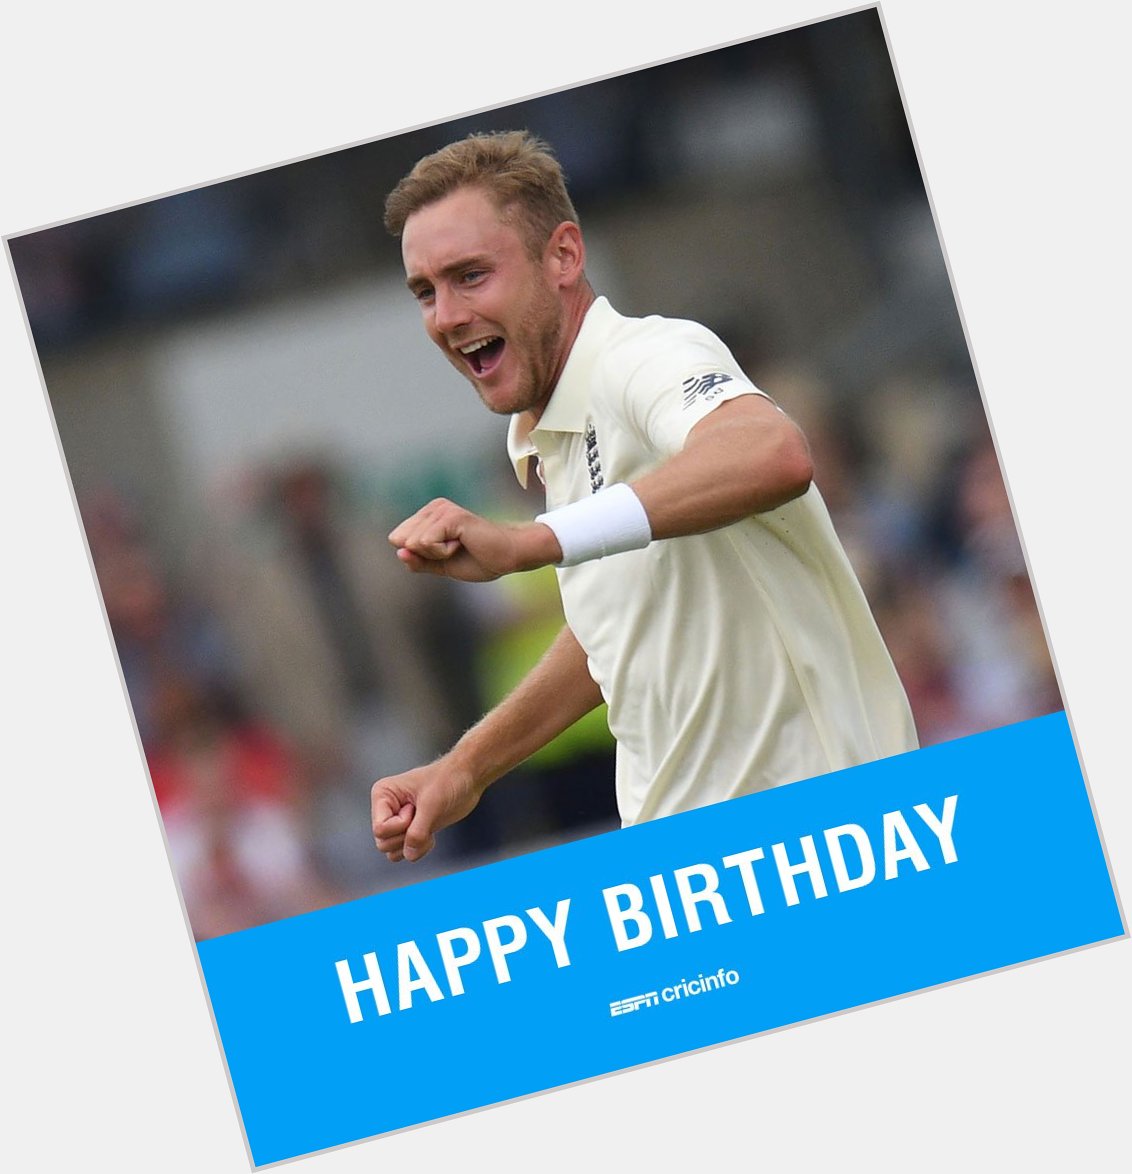 Happy birthday Stuart Broad! 

417 Test wickets by the age of 32. How many will he end up with? 